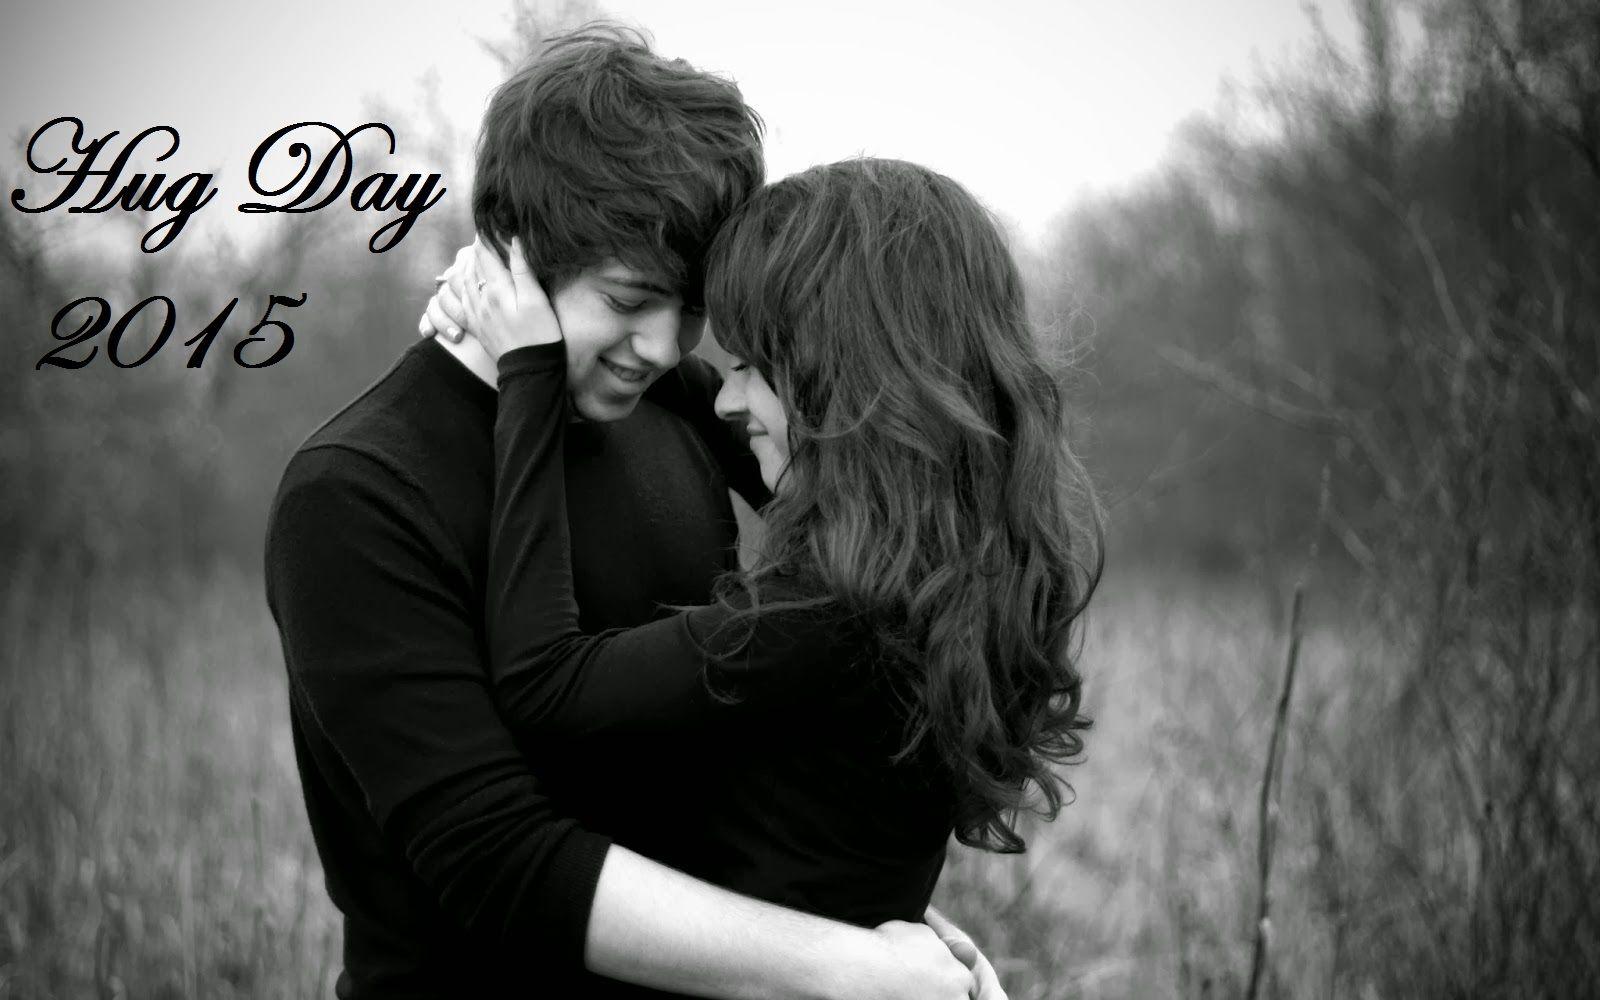 Hug Day SMS Image Wallpaper Quotes Pic Messages. Happy Hug Day